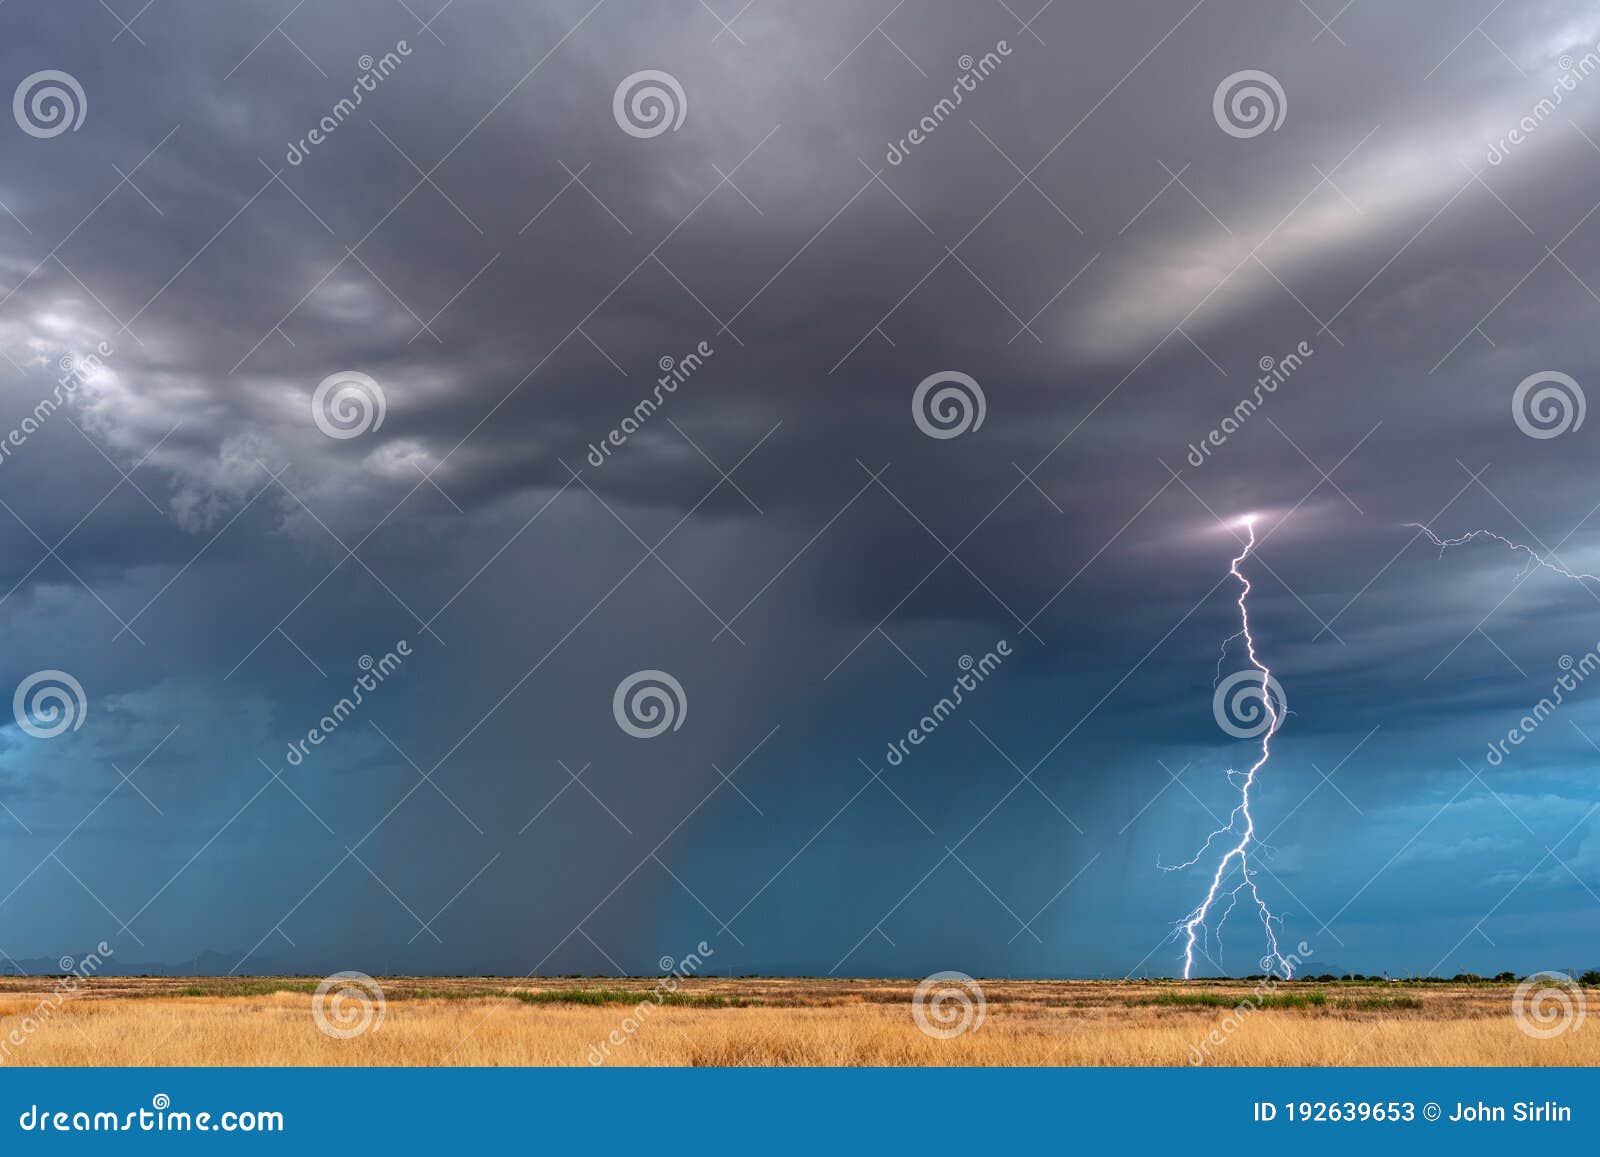 lightning from a monsoon storm